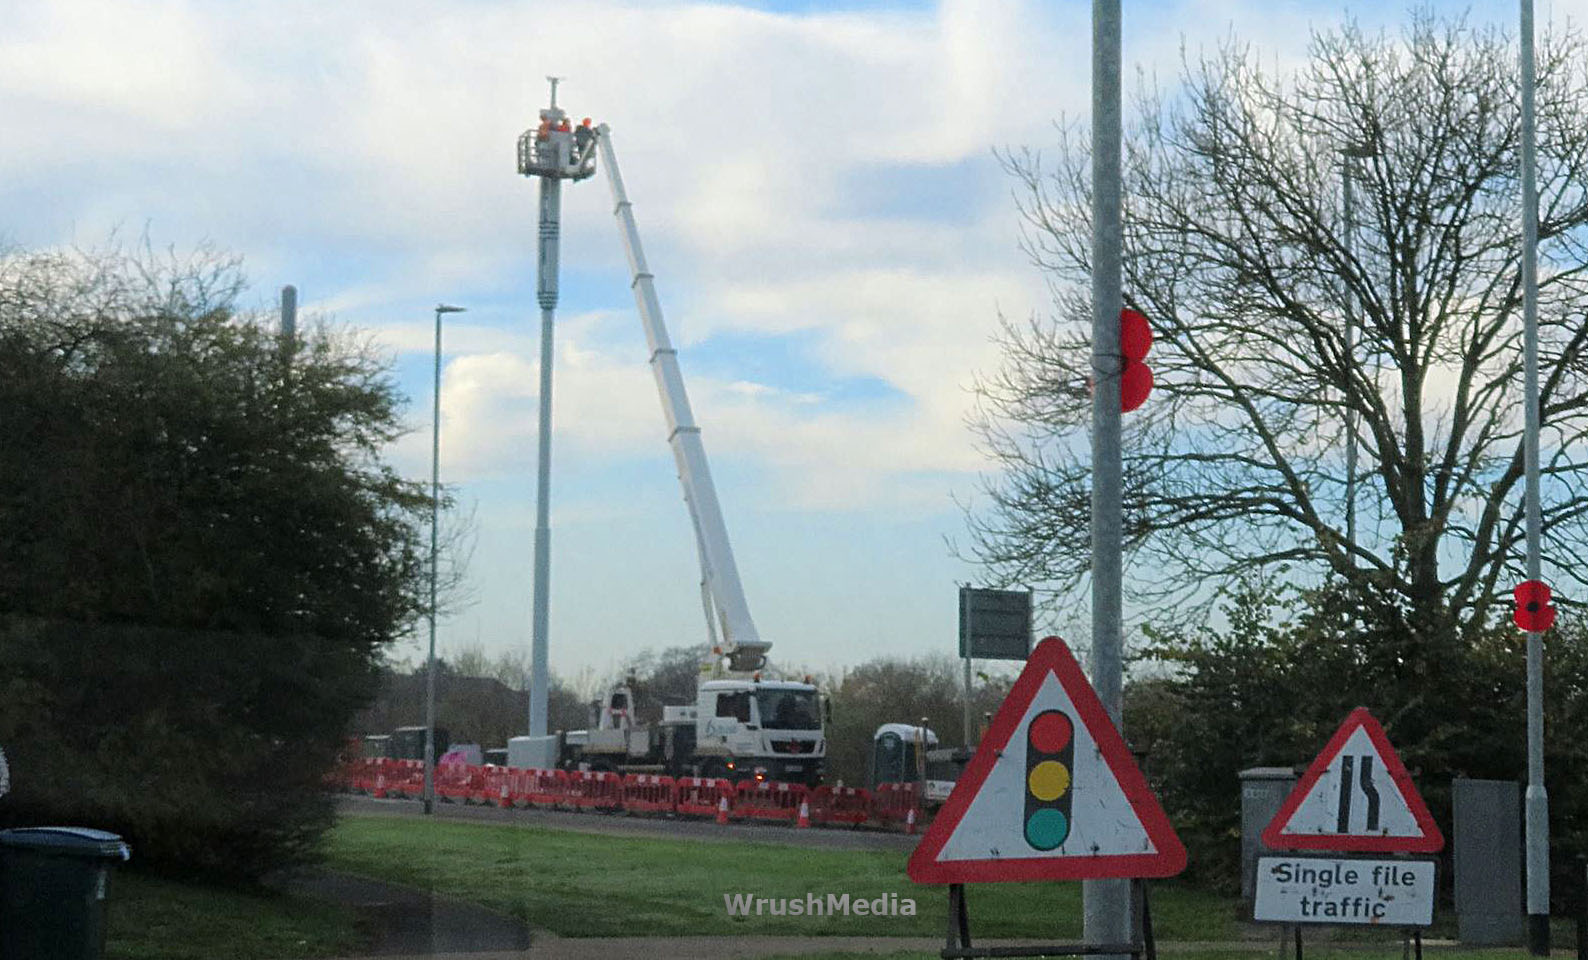 5G mast goes up during Lockdown2 in Watford